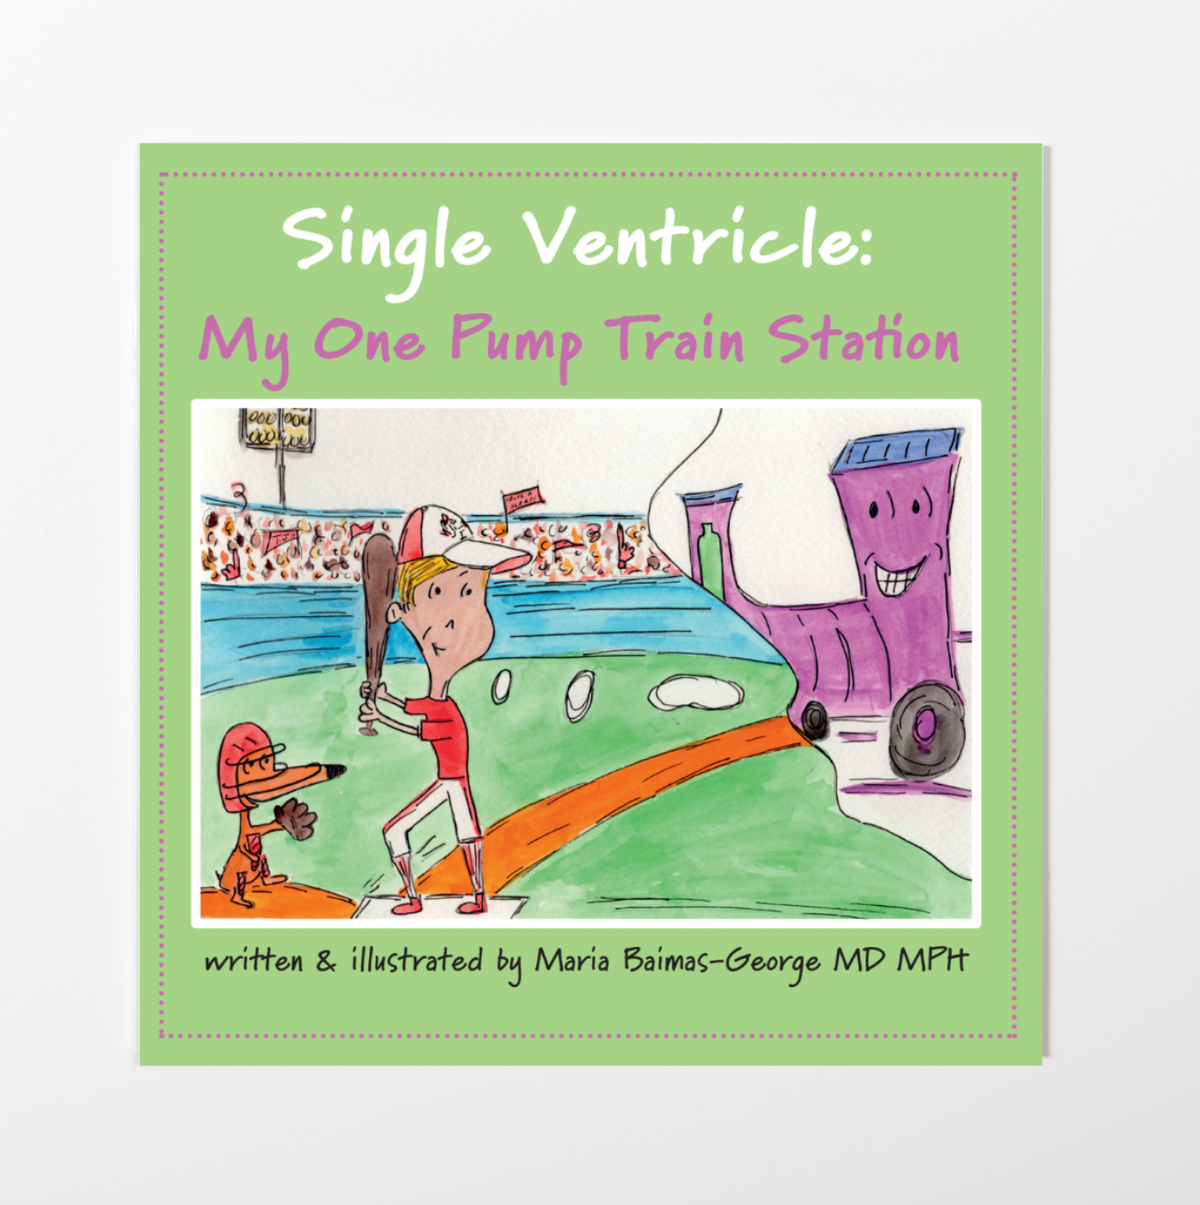 Single Ventricle: My One Pump Train Station